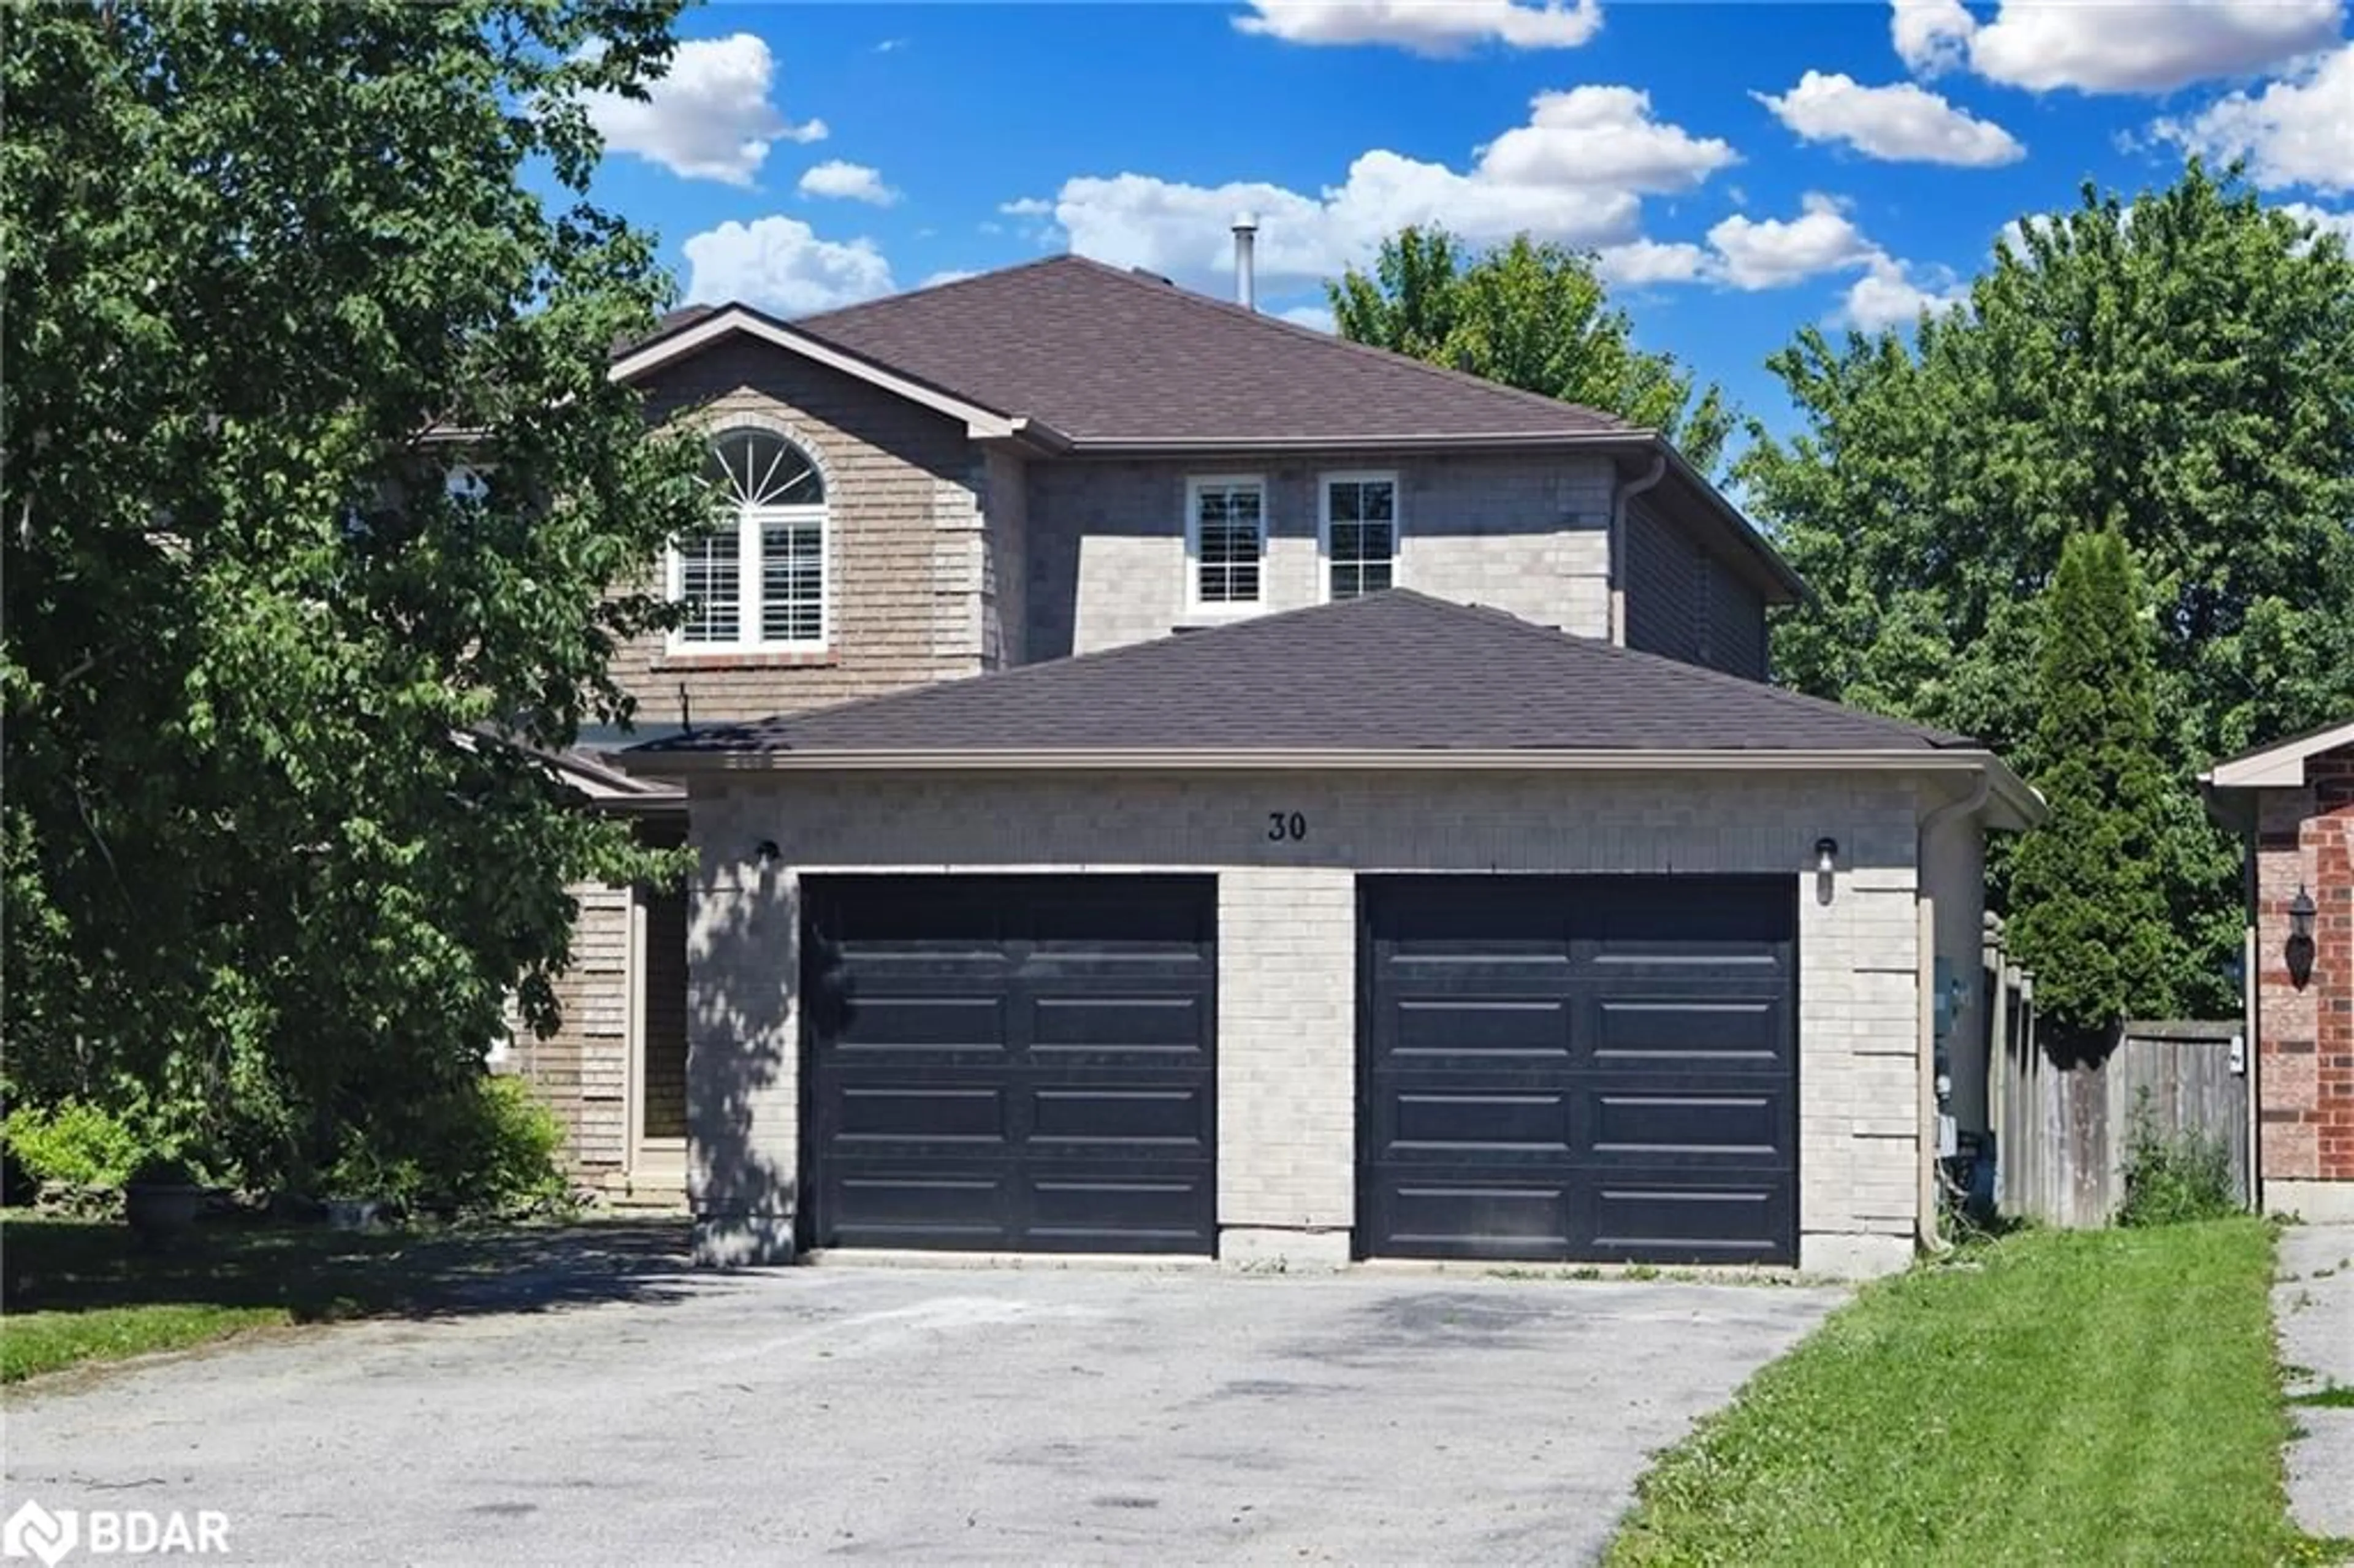 Frontside or backside of a home for 30 Ambler Bay, Barrie Ontario L4M 7A5